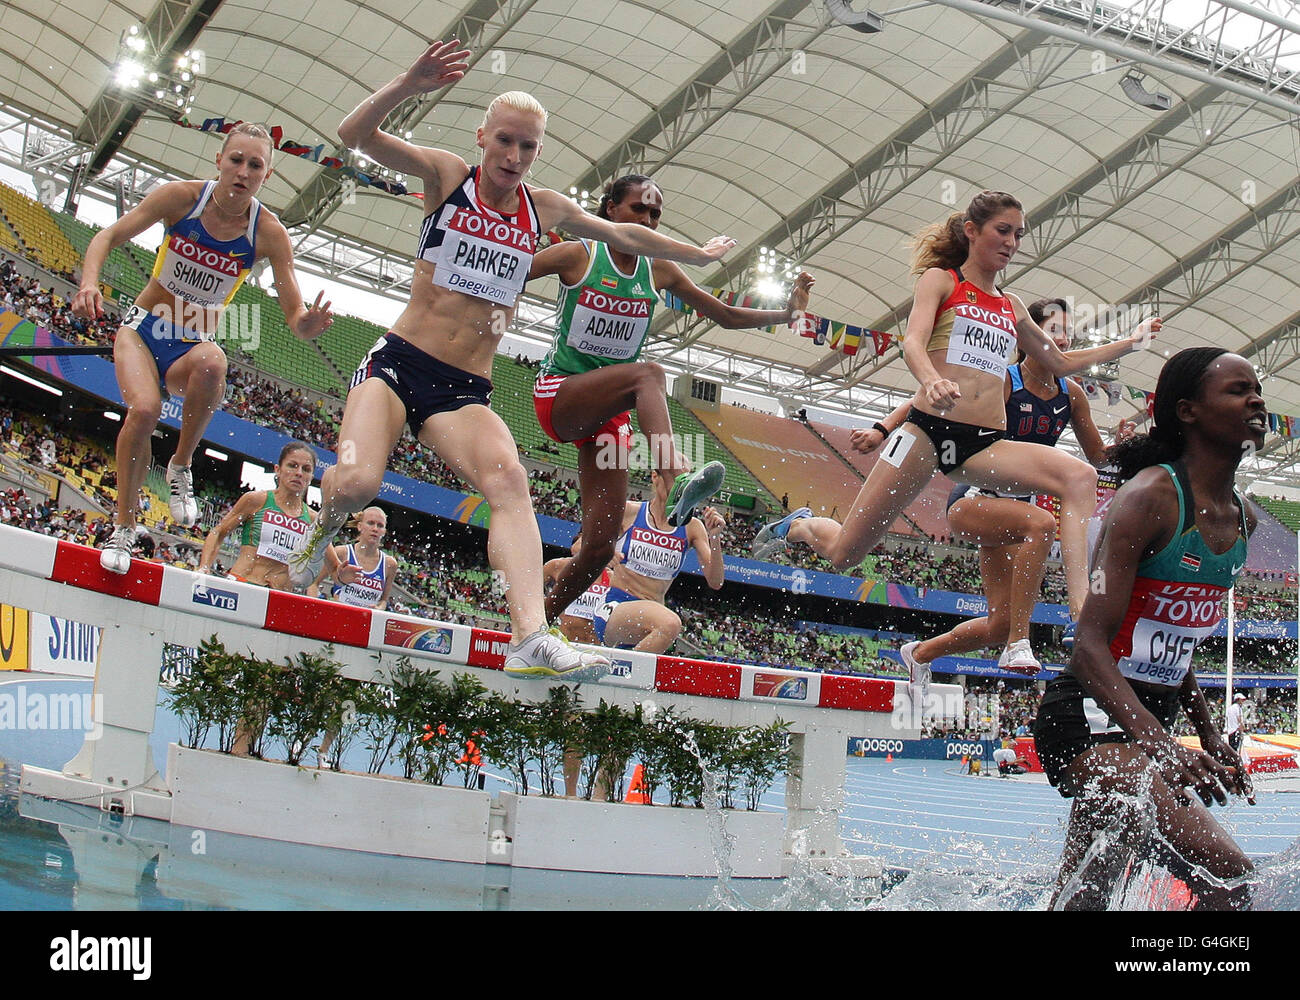 Great Britain's Barbara Parker competes in the women's 3,000 metres steeplechase at the Daegu stadium during day one of the World Athletics Championships in Daegu, South Korea, Saturday August 27, 2011. Parker went on to qualify for Tuesday's final. Stock Photo